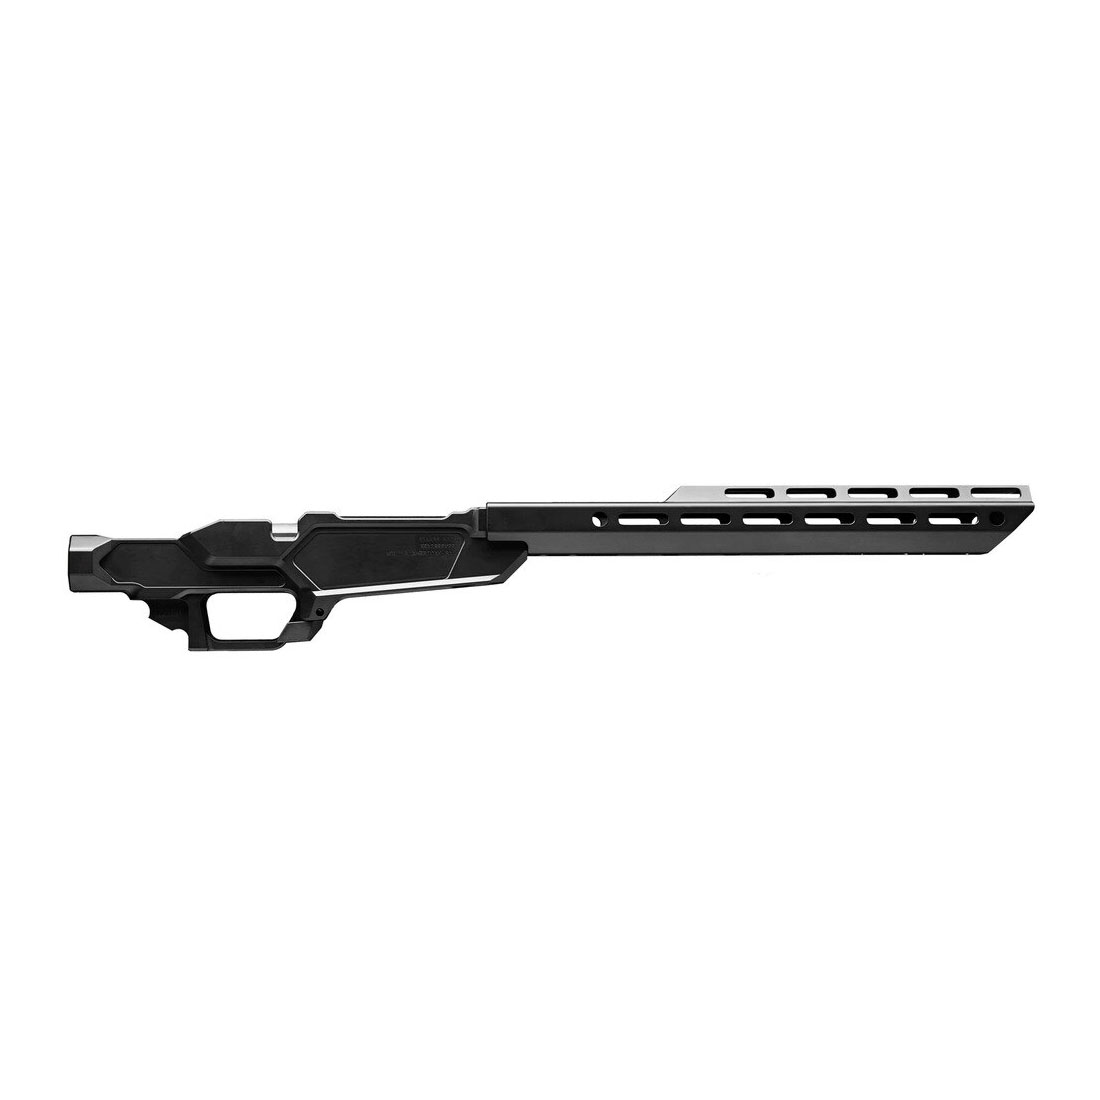 Will this stock fit the Ruger American predator gen2 (model 26973) that takes detachable AICS mags?